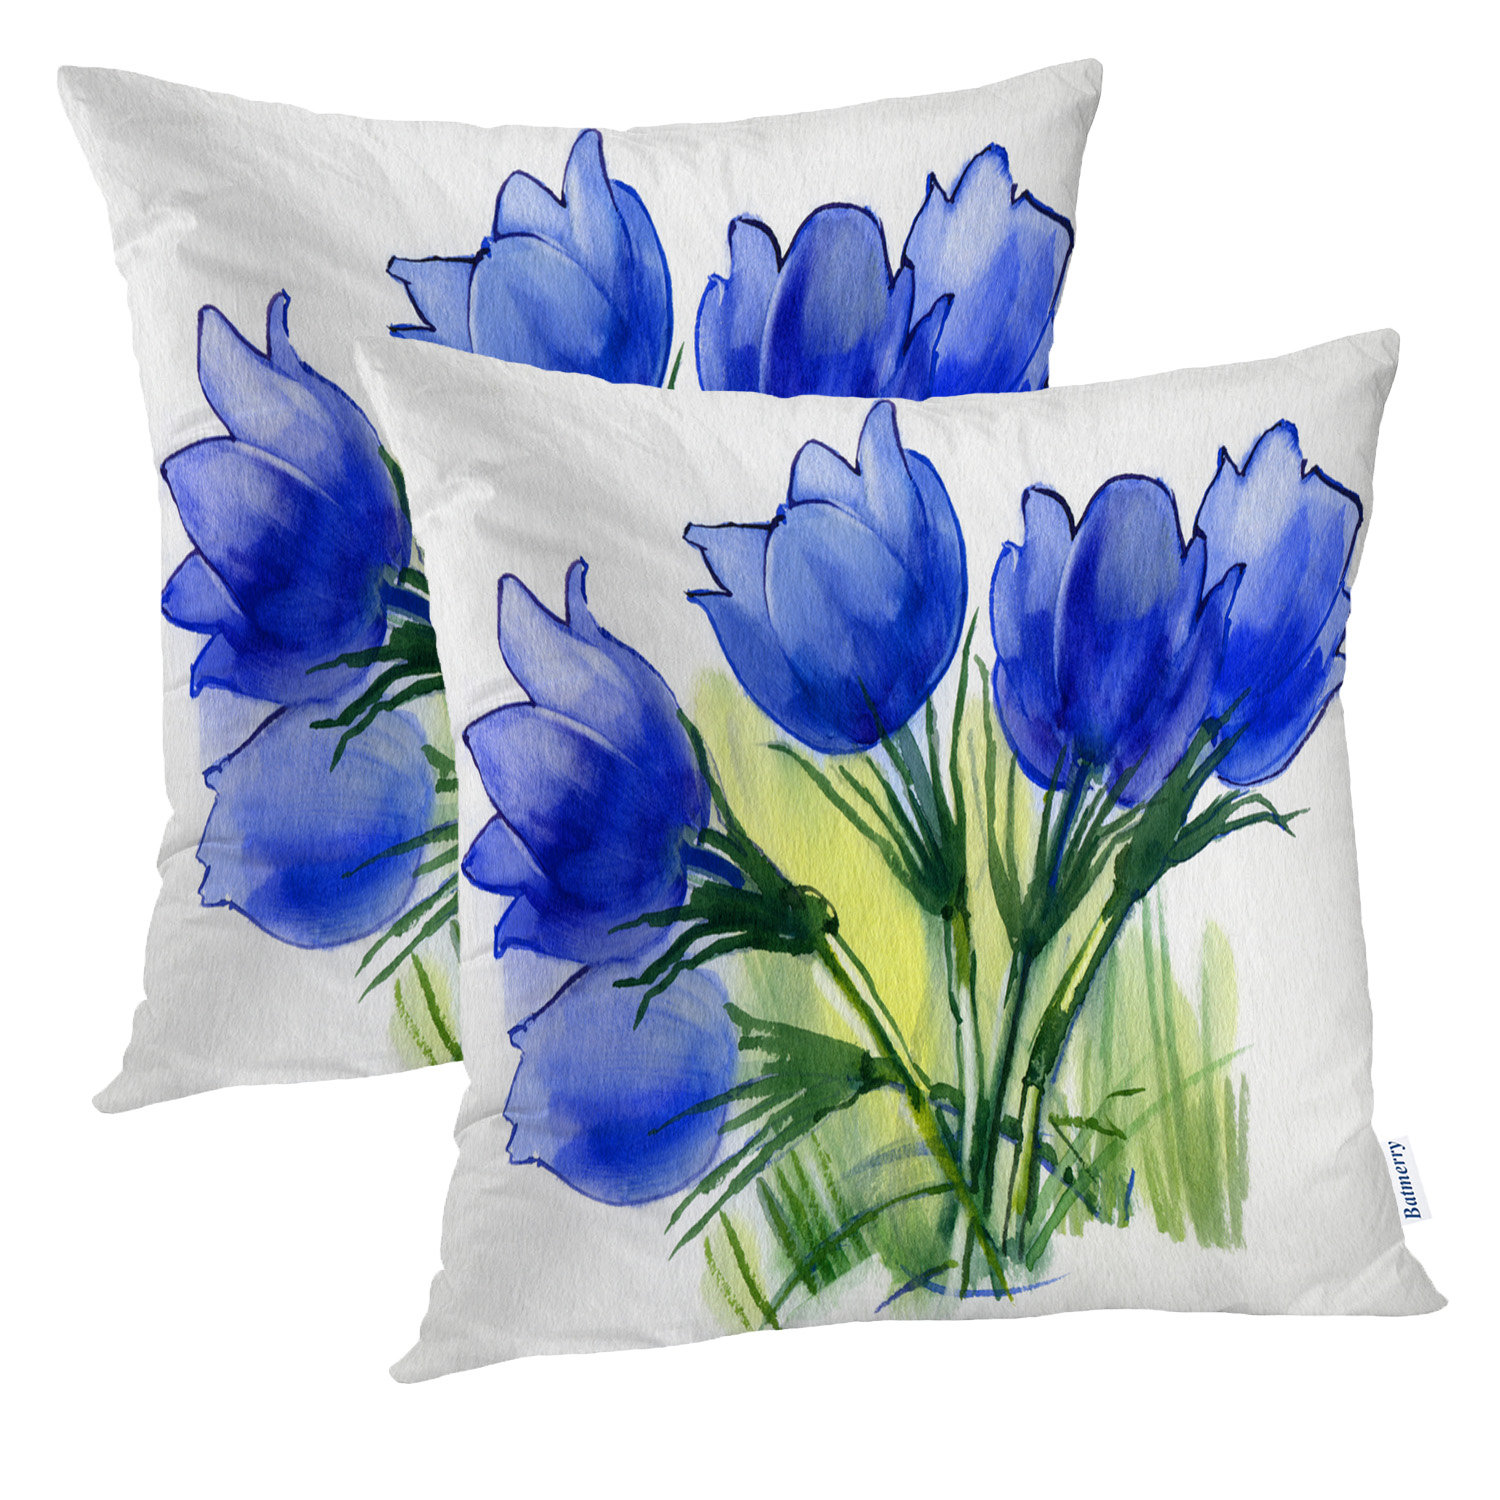 Batmerry Spring Pillows Decorative Throw Pillow Covers 18x18 Inch Set of 2 Spring White Daffodils Flowers Delicate Pattern Double Sided Square Pillow Cases Pillowcase Sofa Cushion